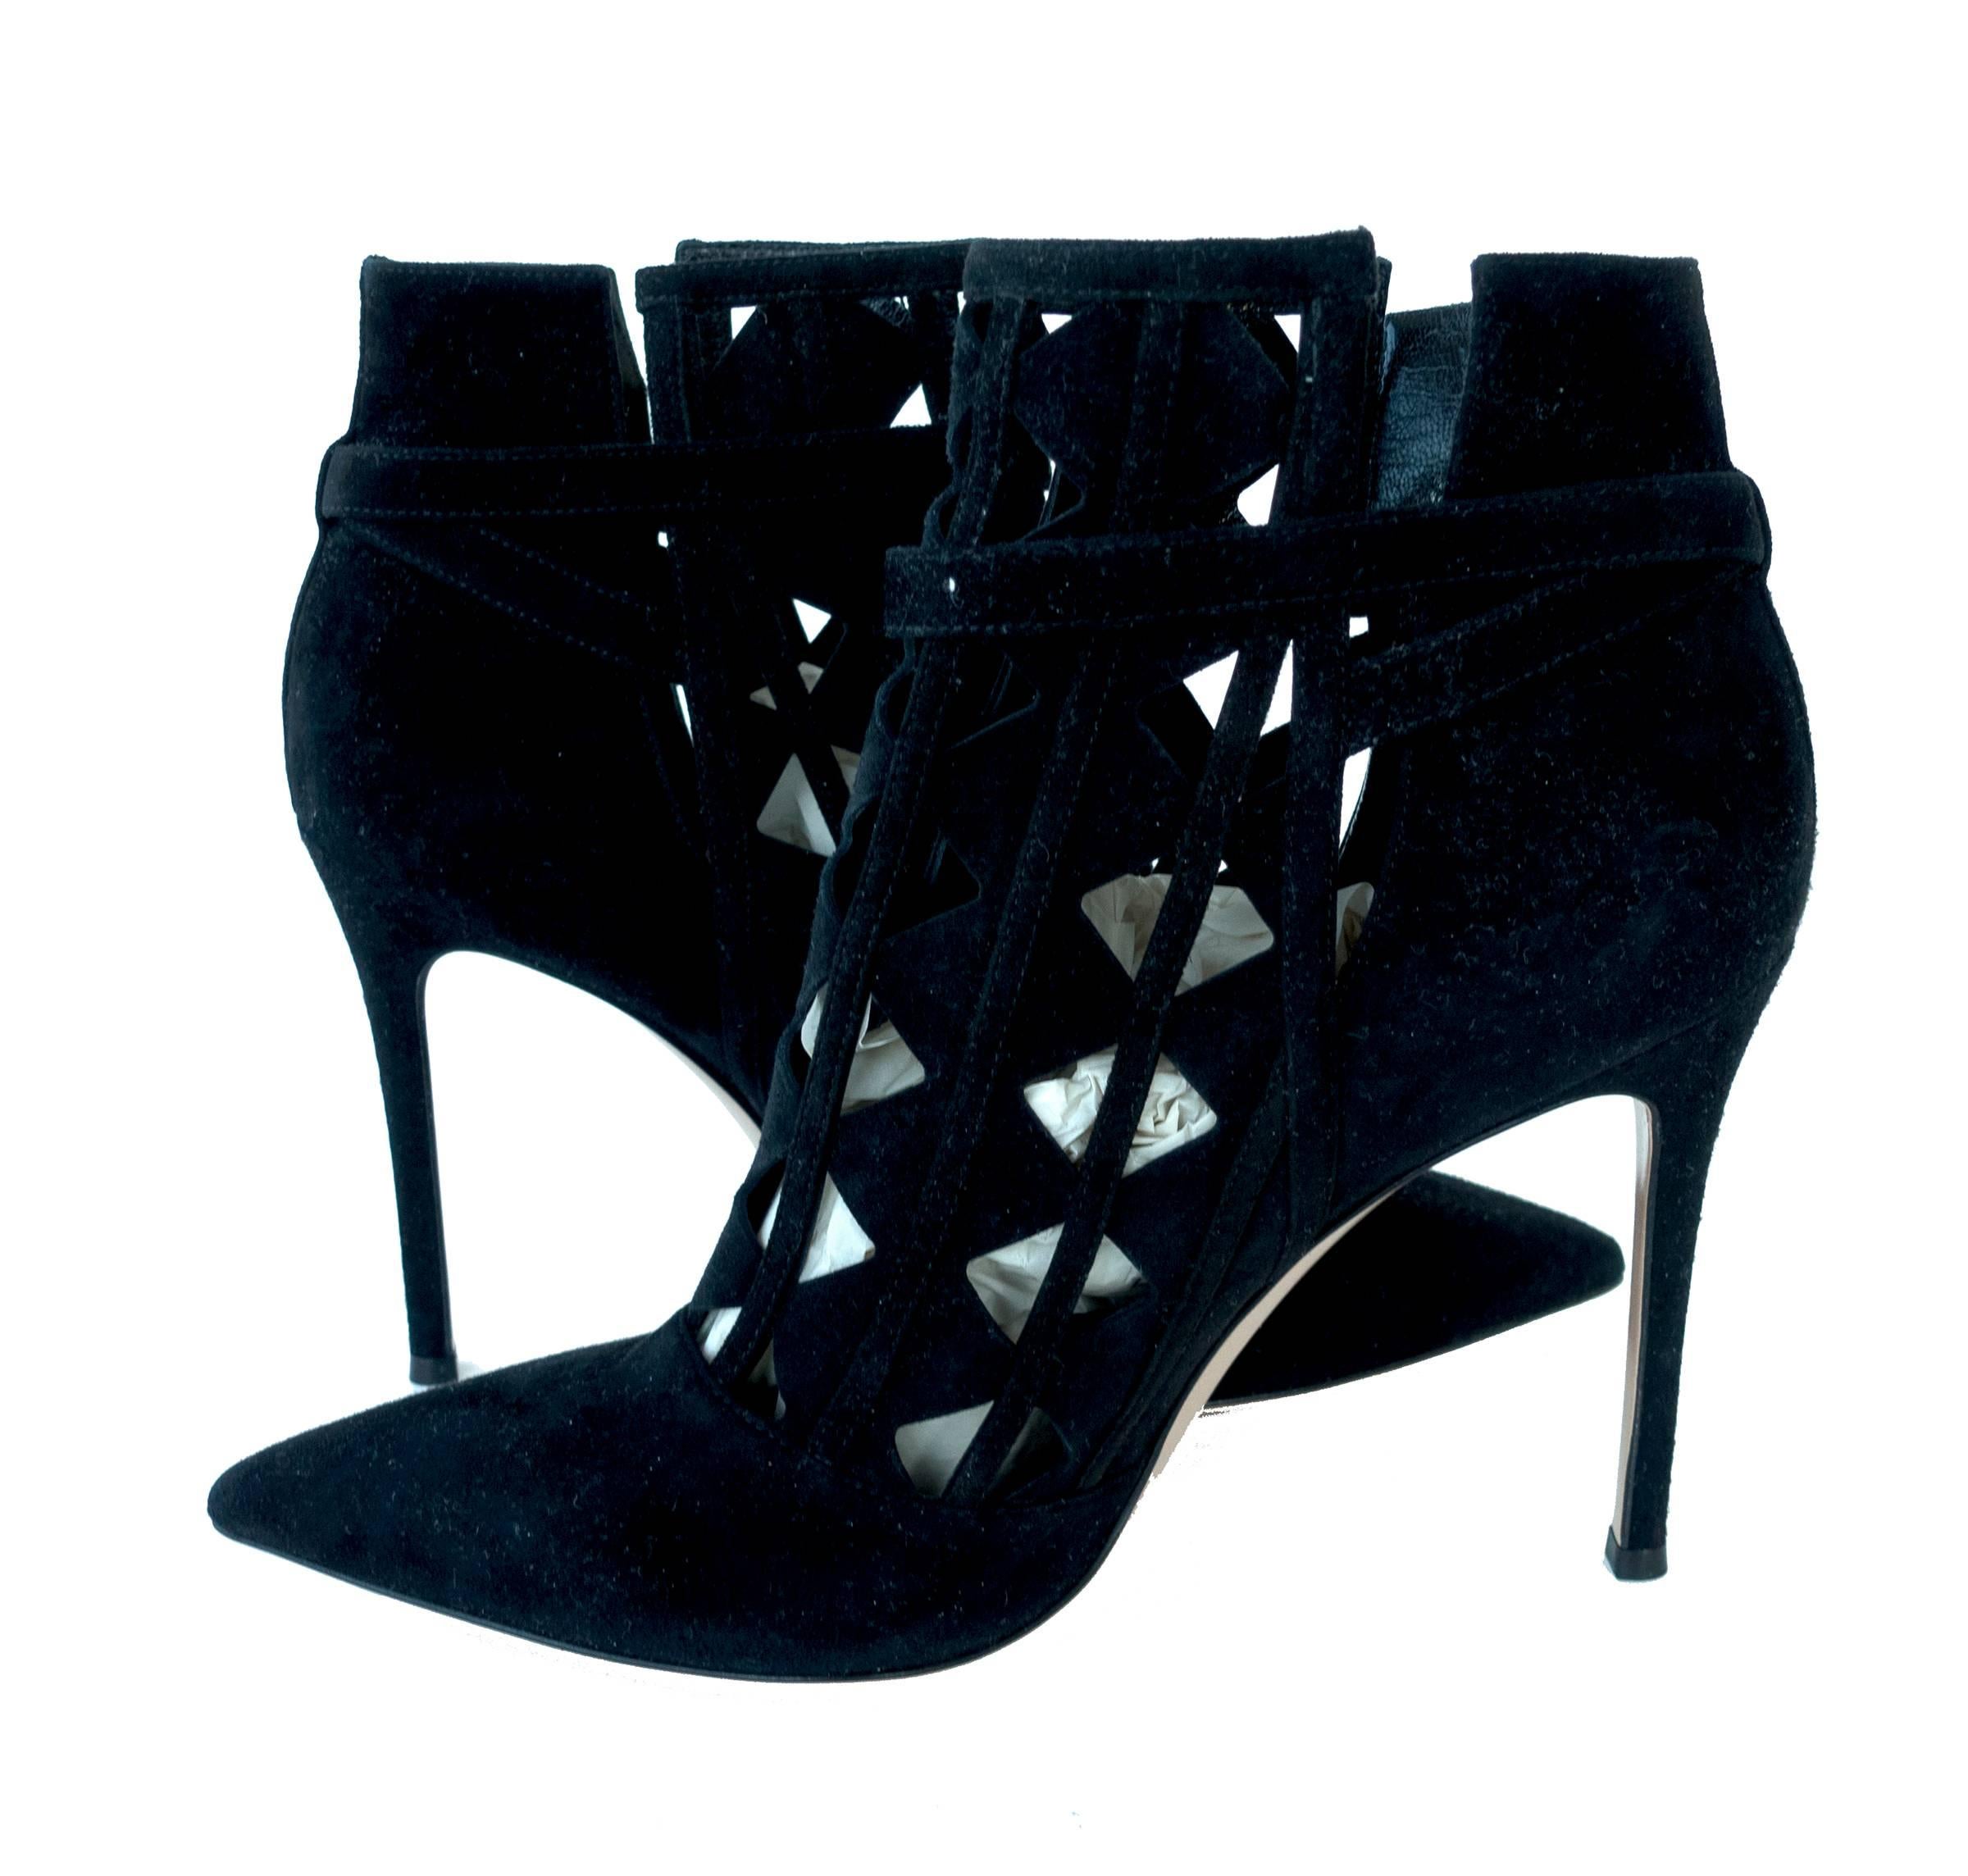 Gianvito Rossi Cutout Black Suede High Ankle Bootie Chic size 40.5 1